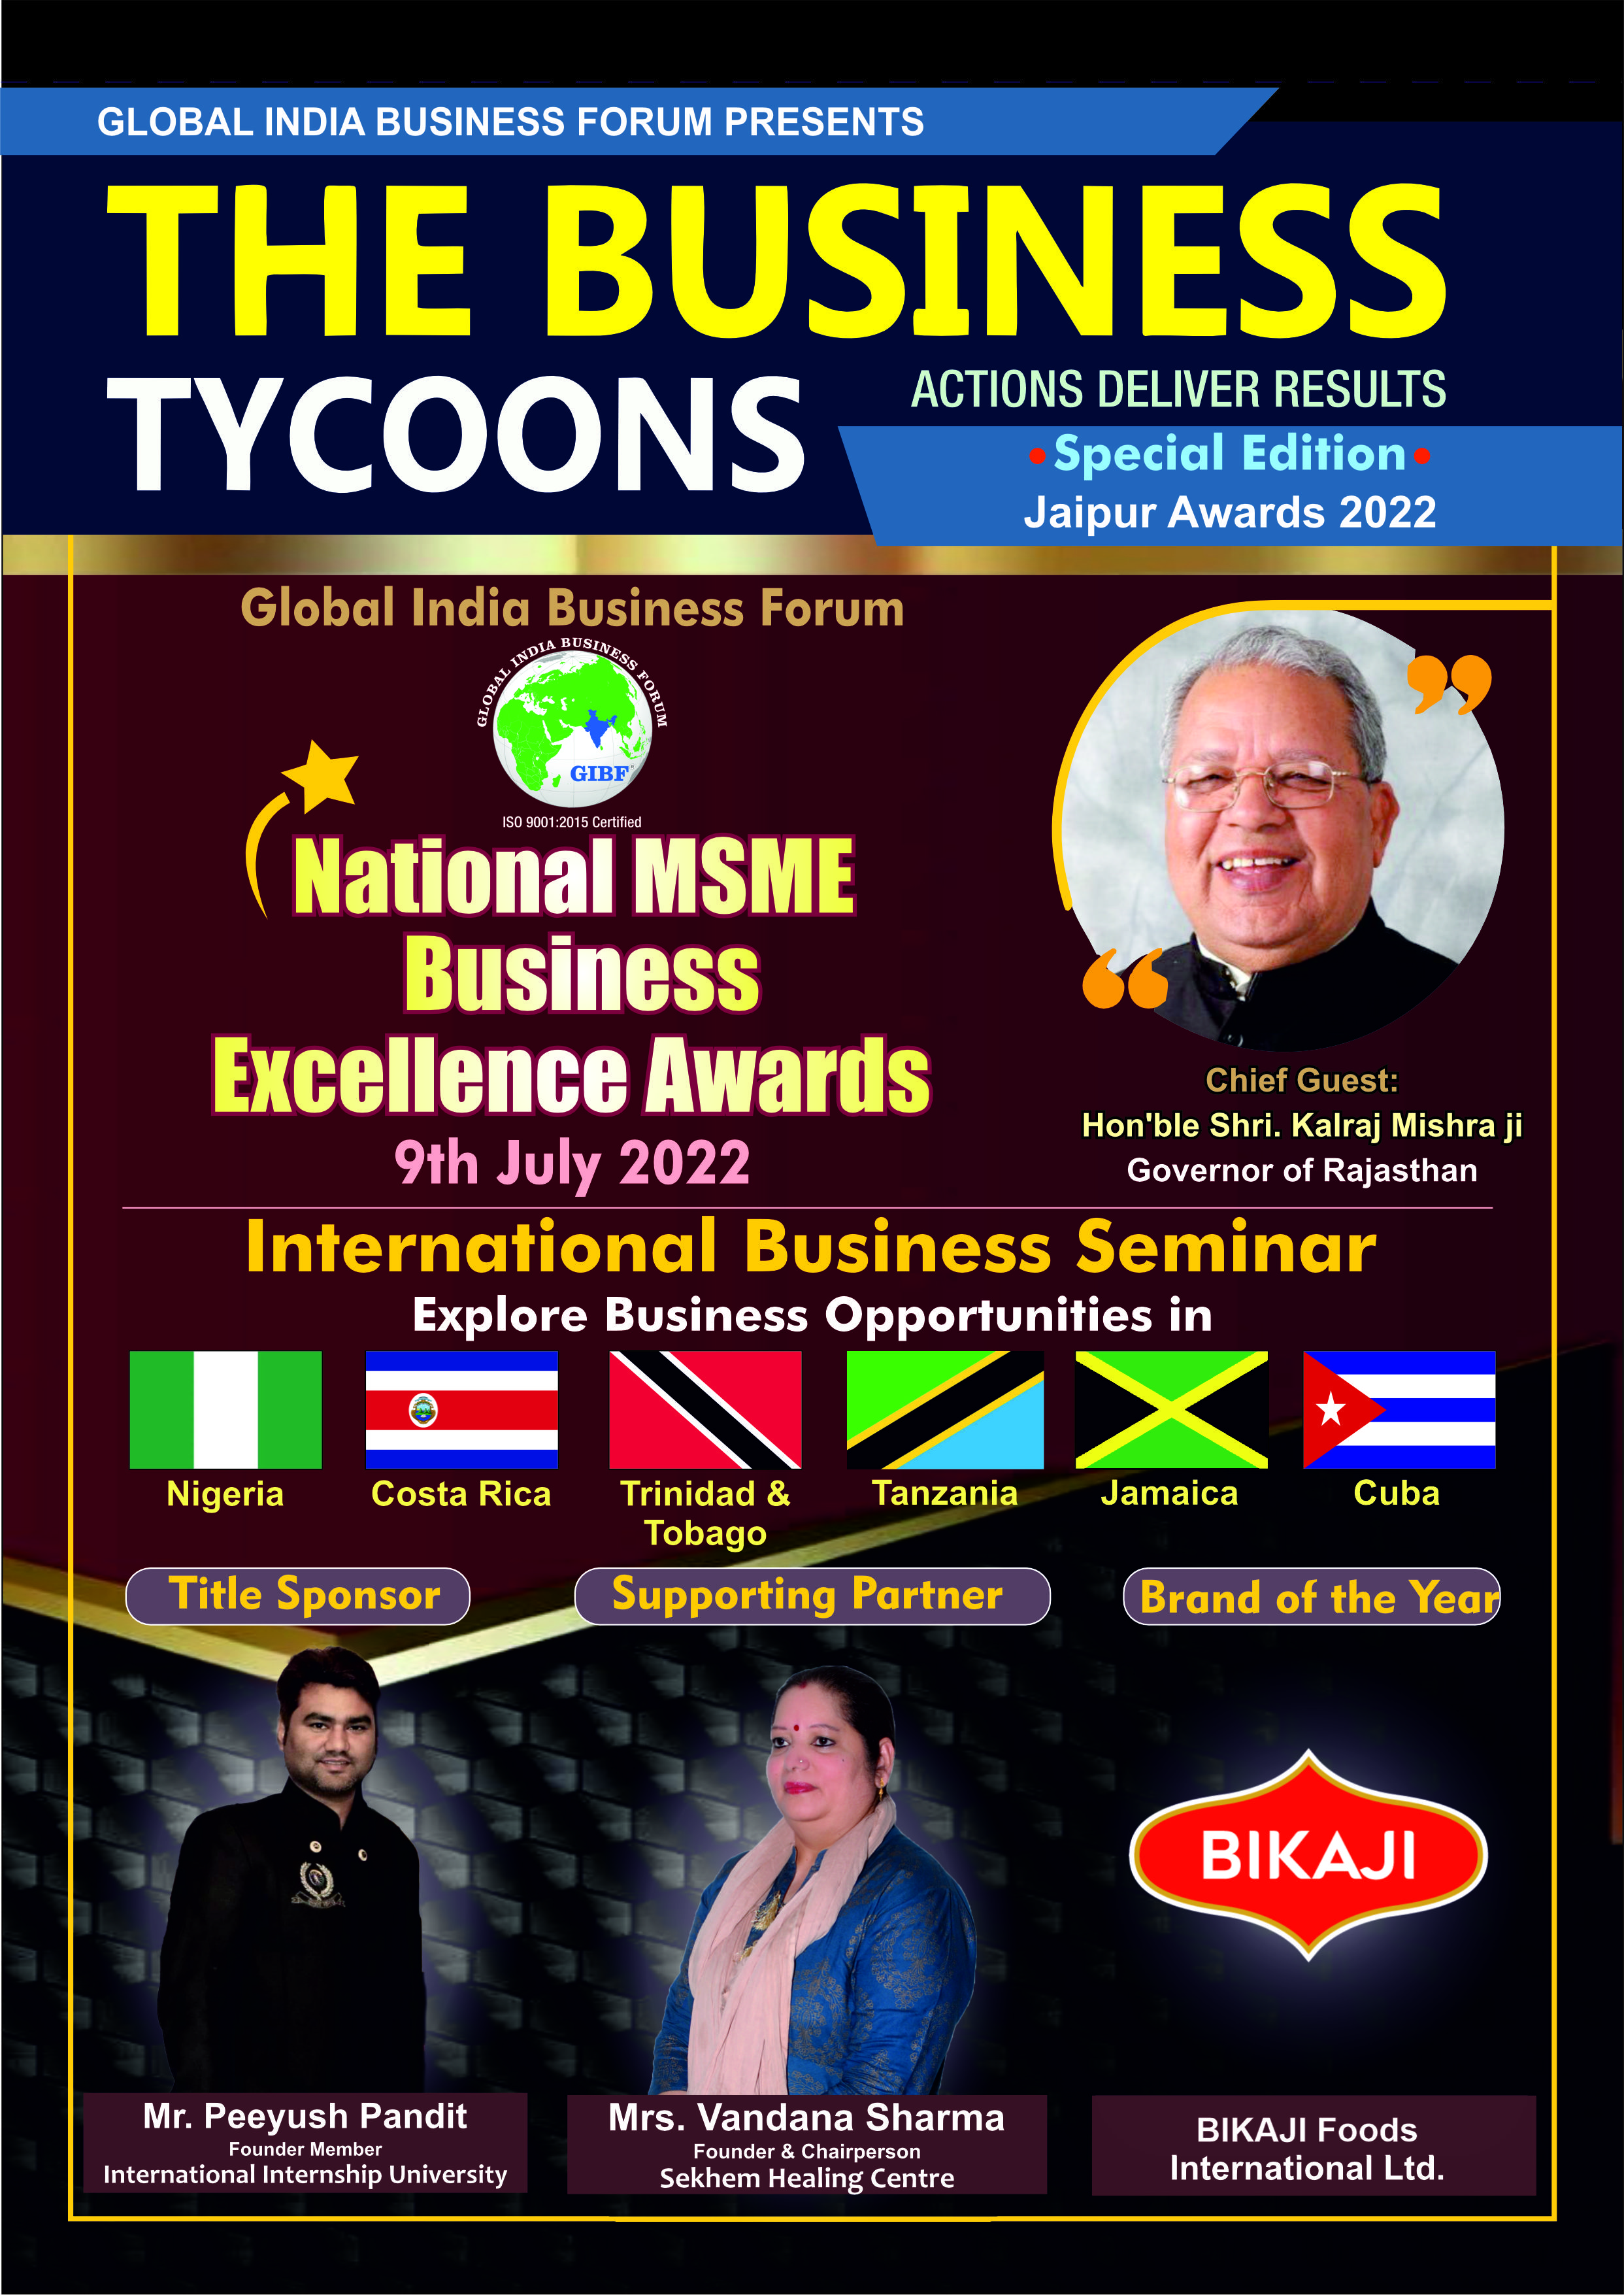 The Business Tycoons  National MSME Award for Business Excellence - Jaipur 2022